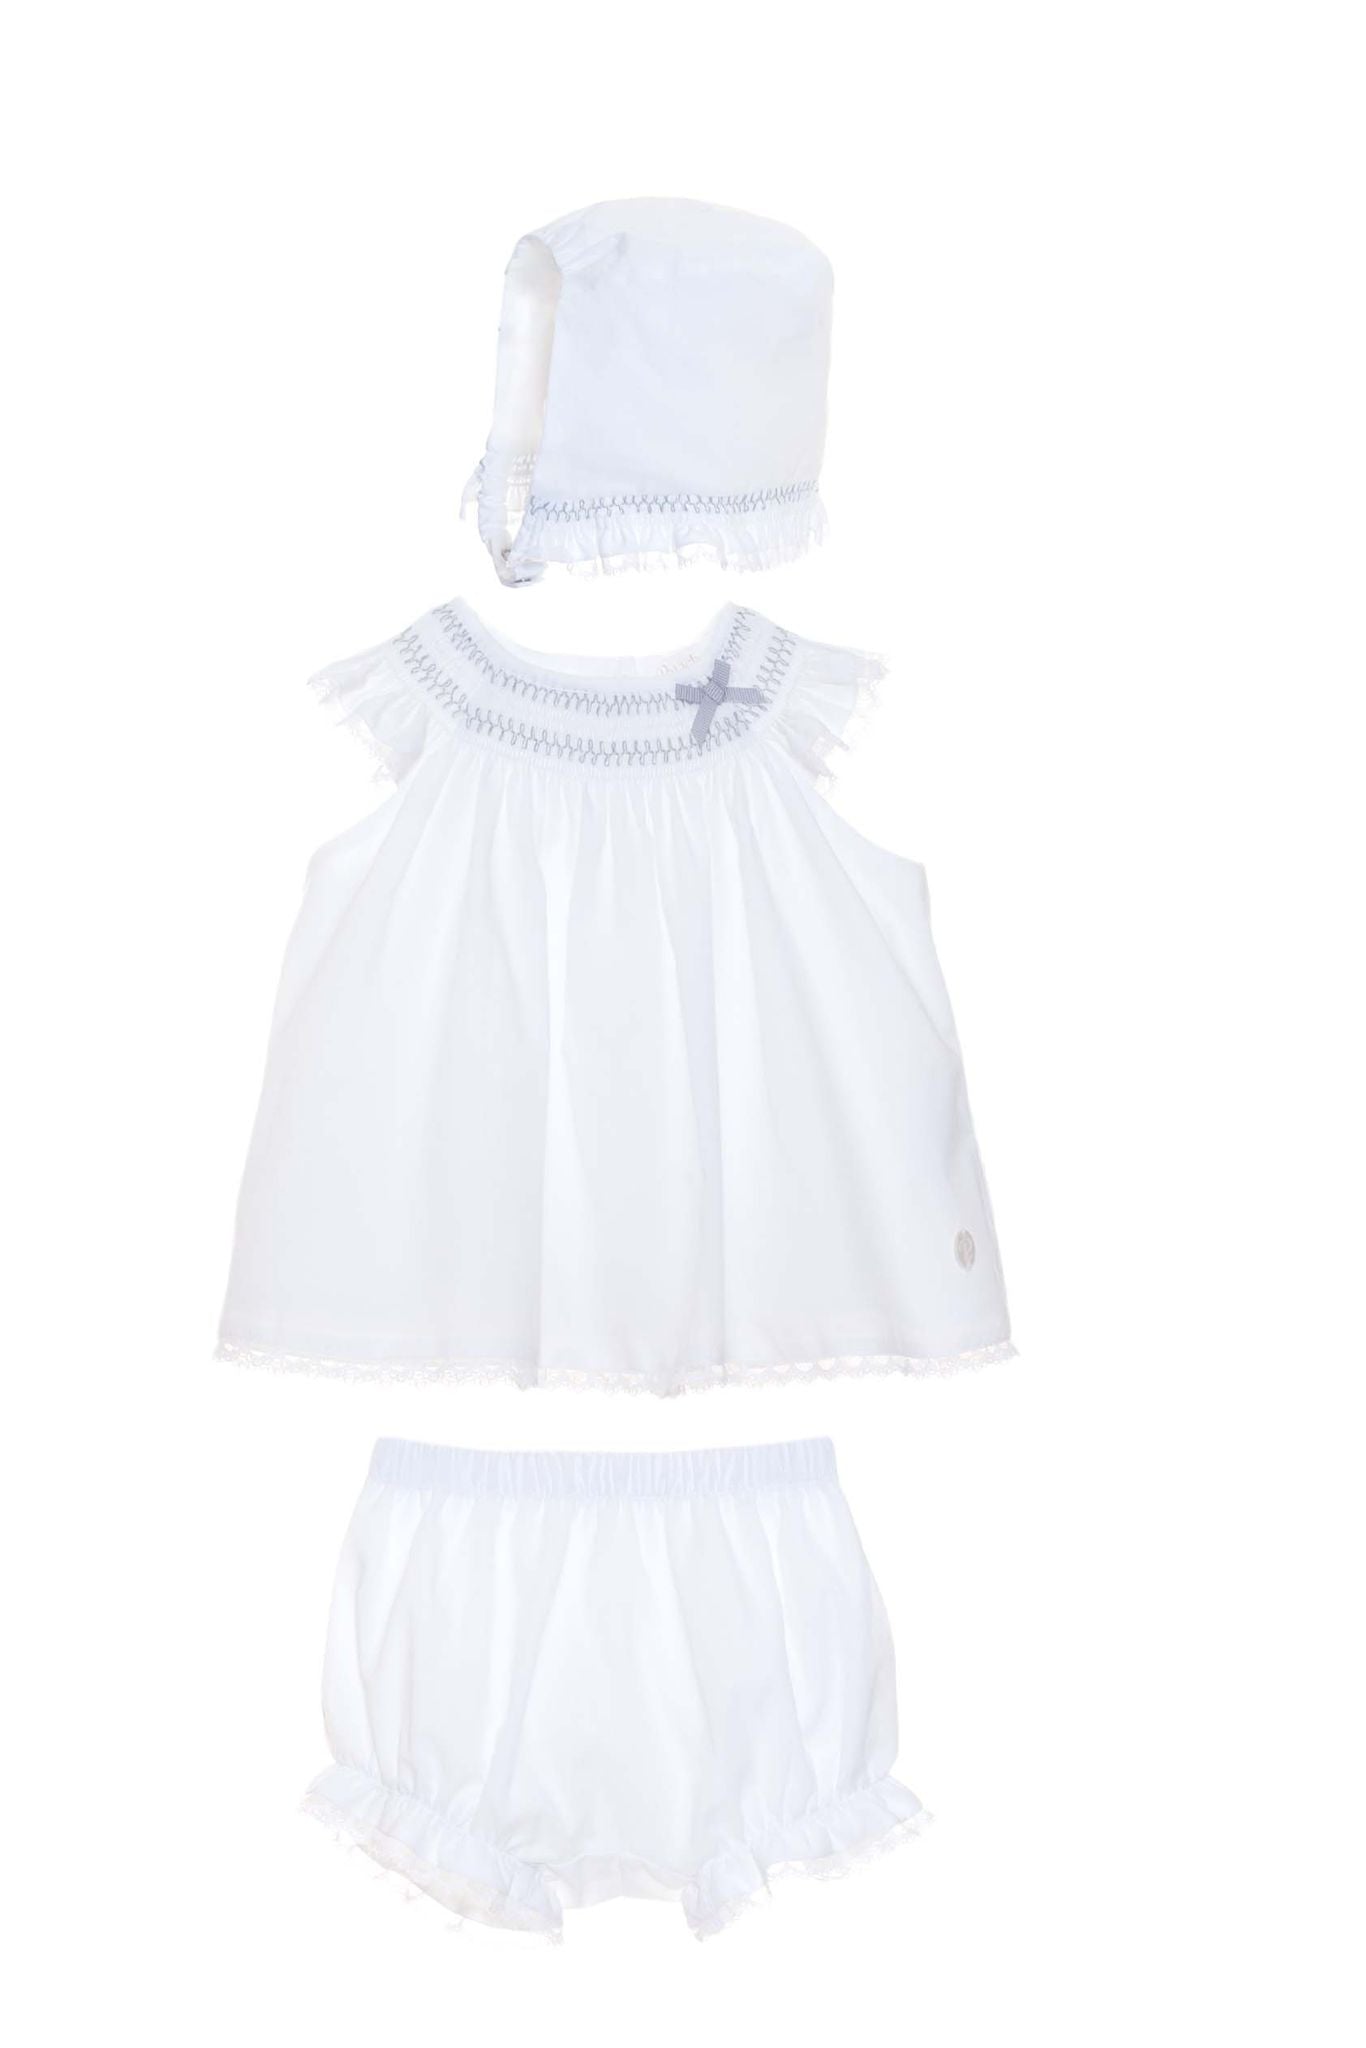 3 Piece Smocked Bloomer Set and Bonnet - White